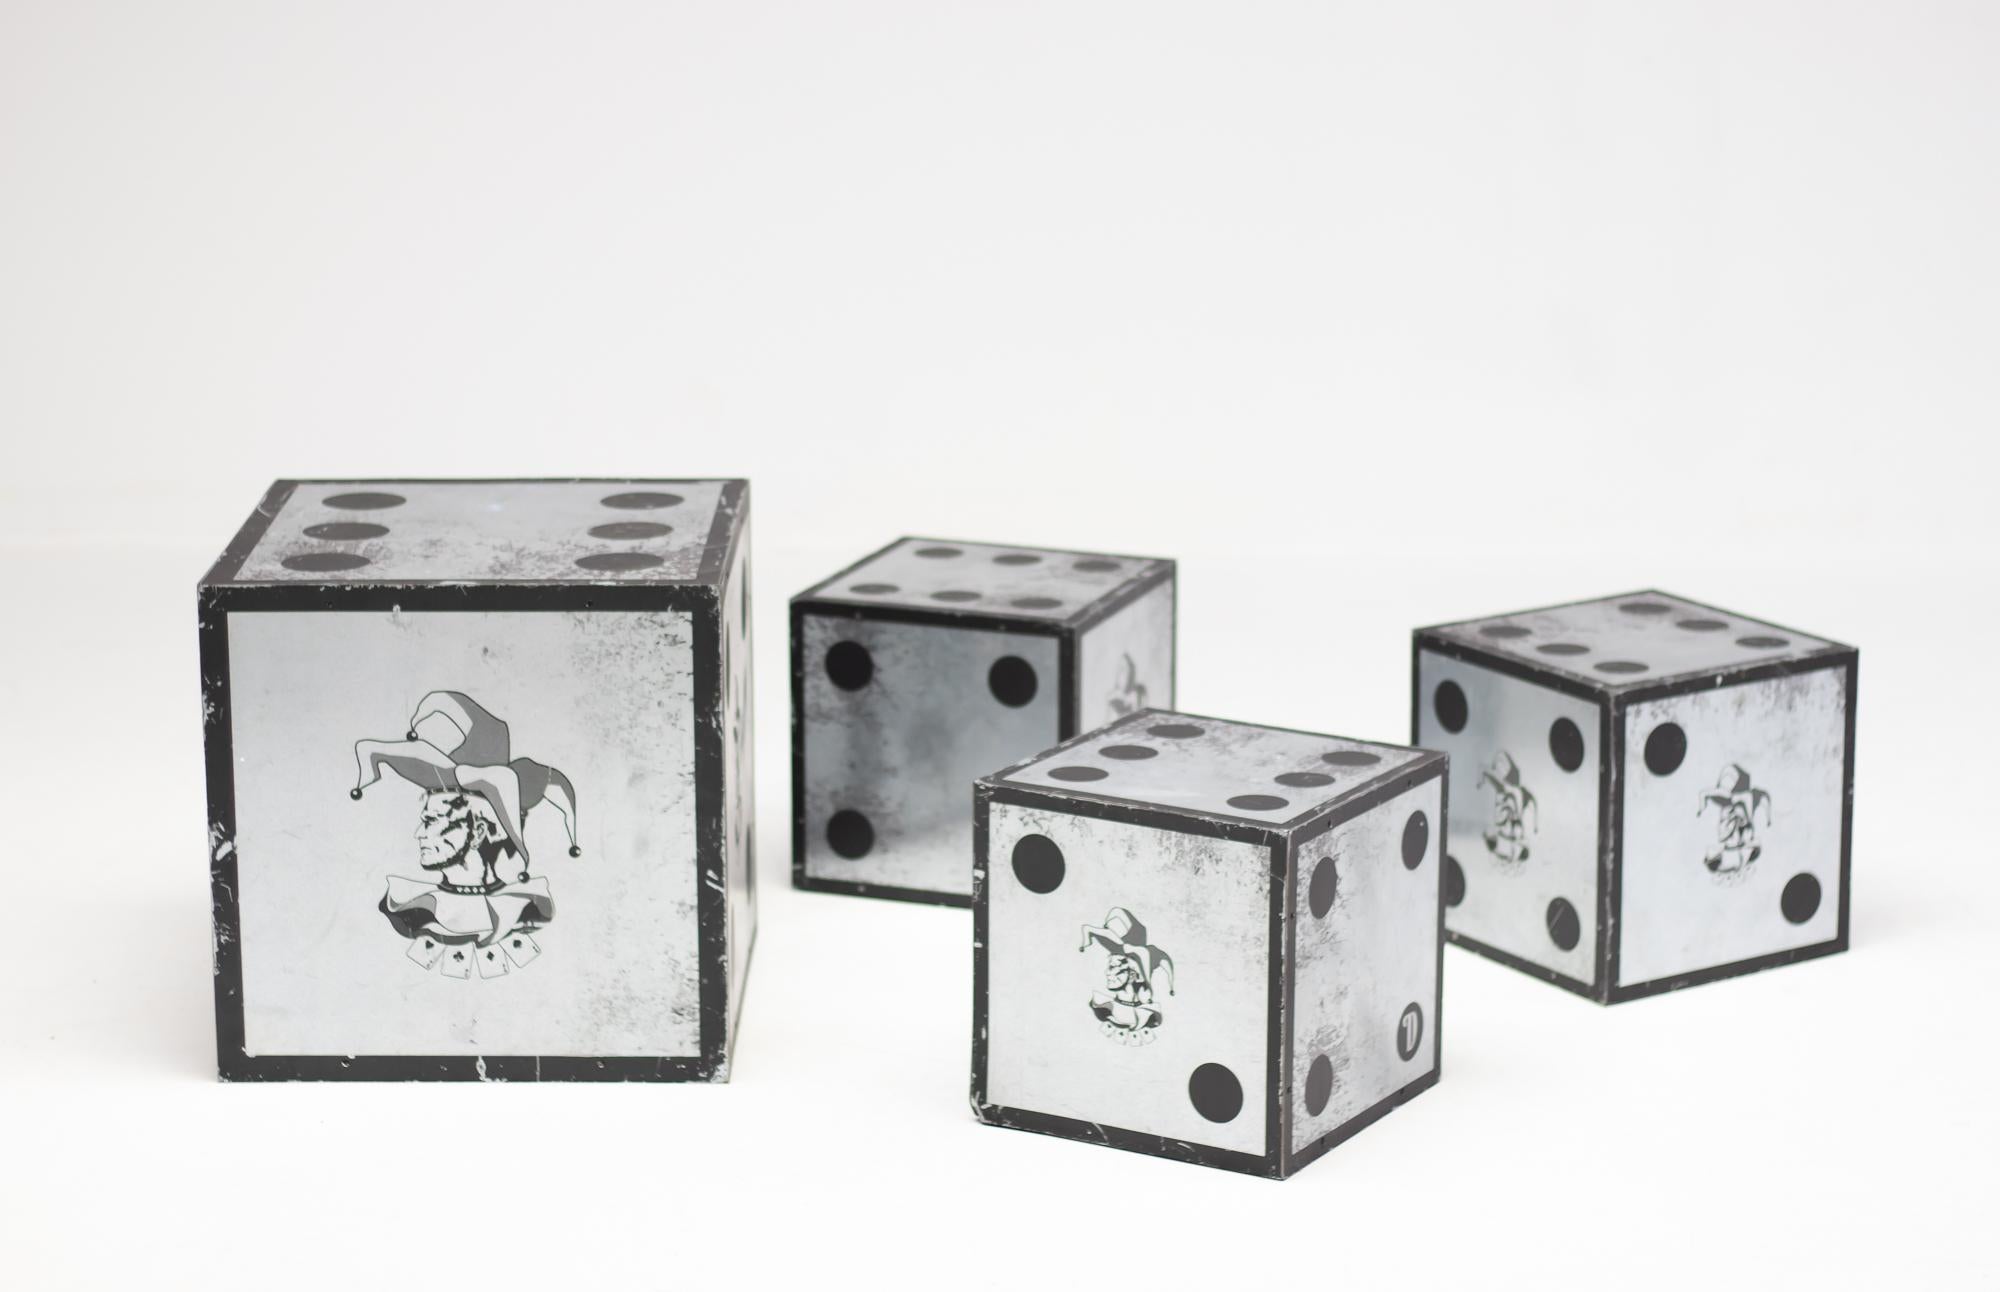 Shop window display cubes in galvanized steel with Diesel prints.
Used as display material in the Amsterdam Diesel flagship store.
One 35 cm cube and three 25 cm cubes.